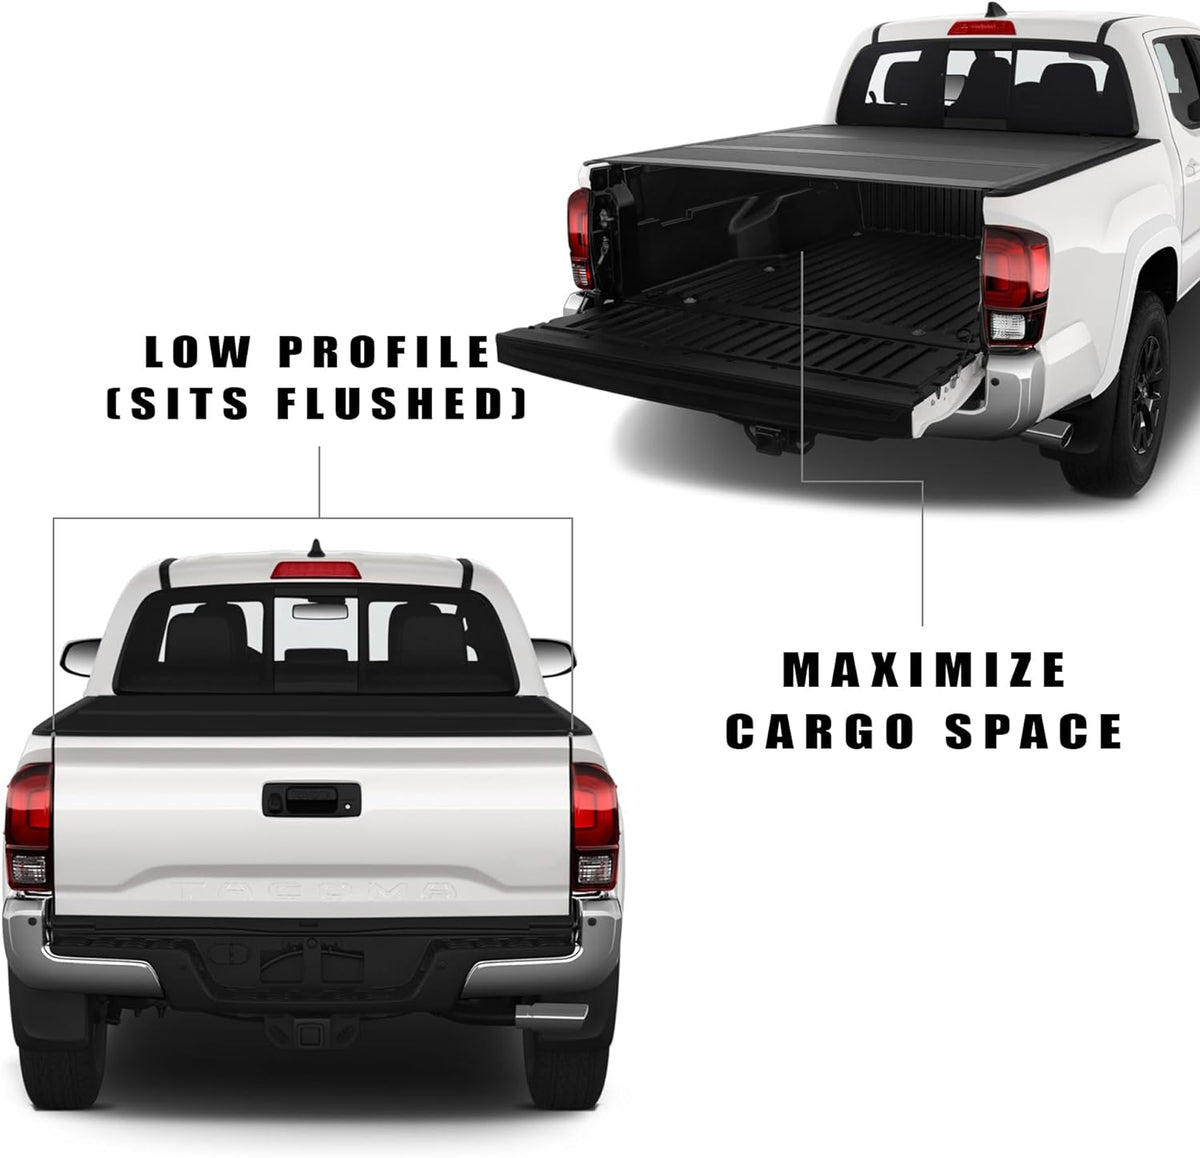 Armordillo USA 8705308 CoveRex TFX Series Low Profile Hard Tri-Fold Truck Bed Tonneau Cover Fits 2016-2023 Toyota Tacoma 5 Ft (60&quot;) Short Bed